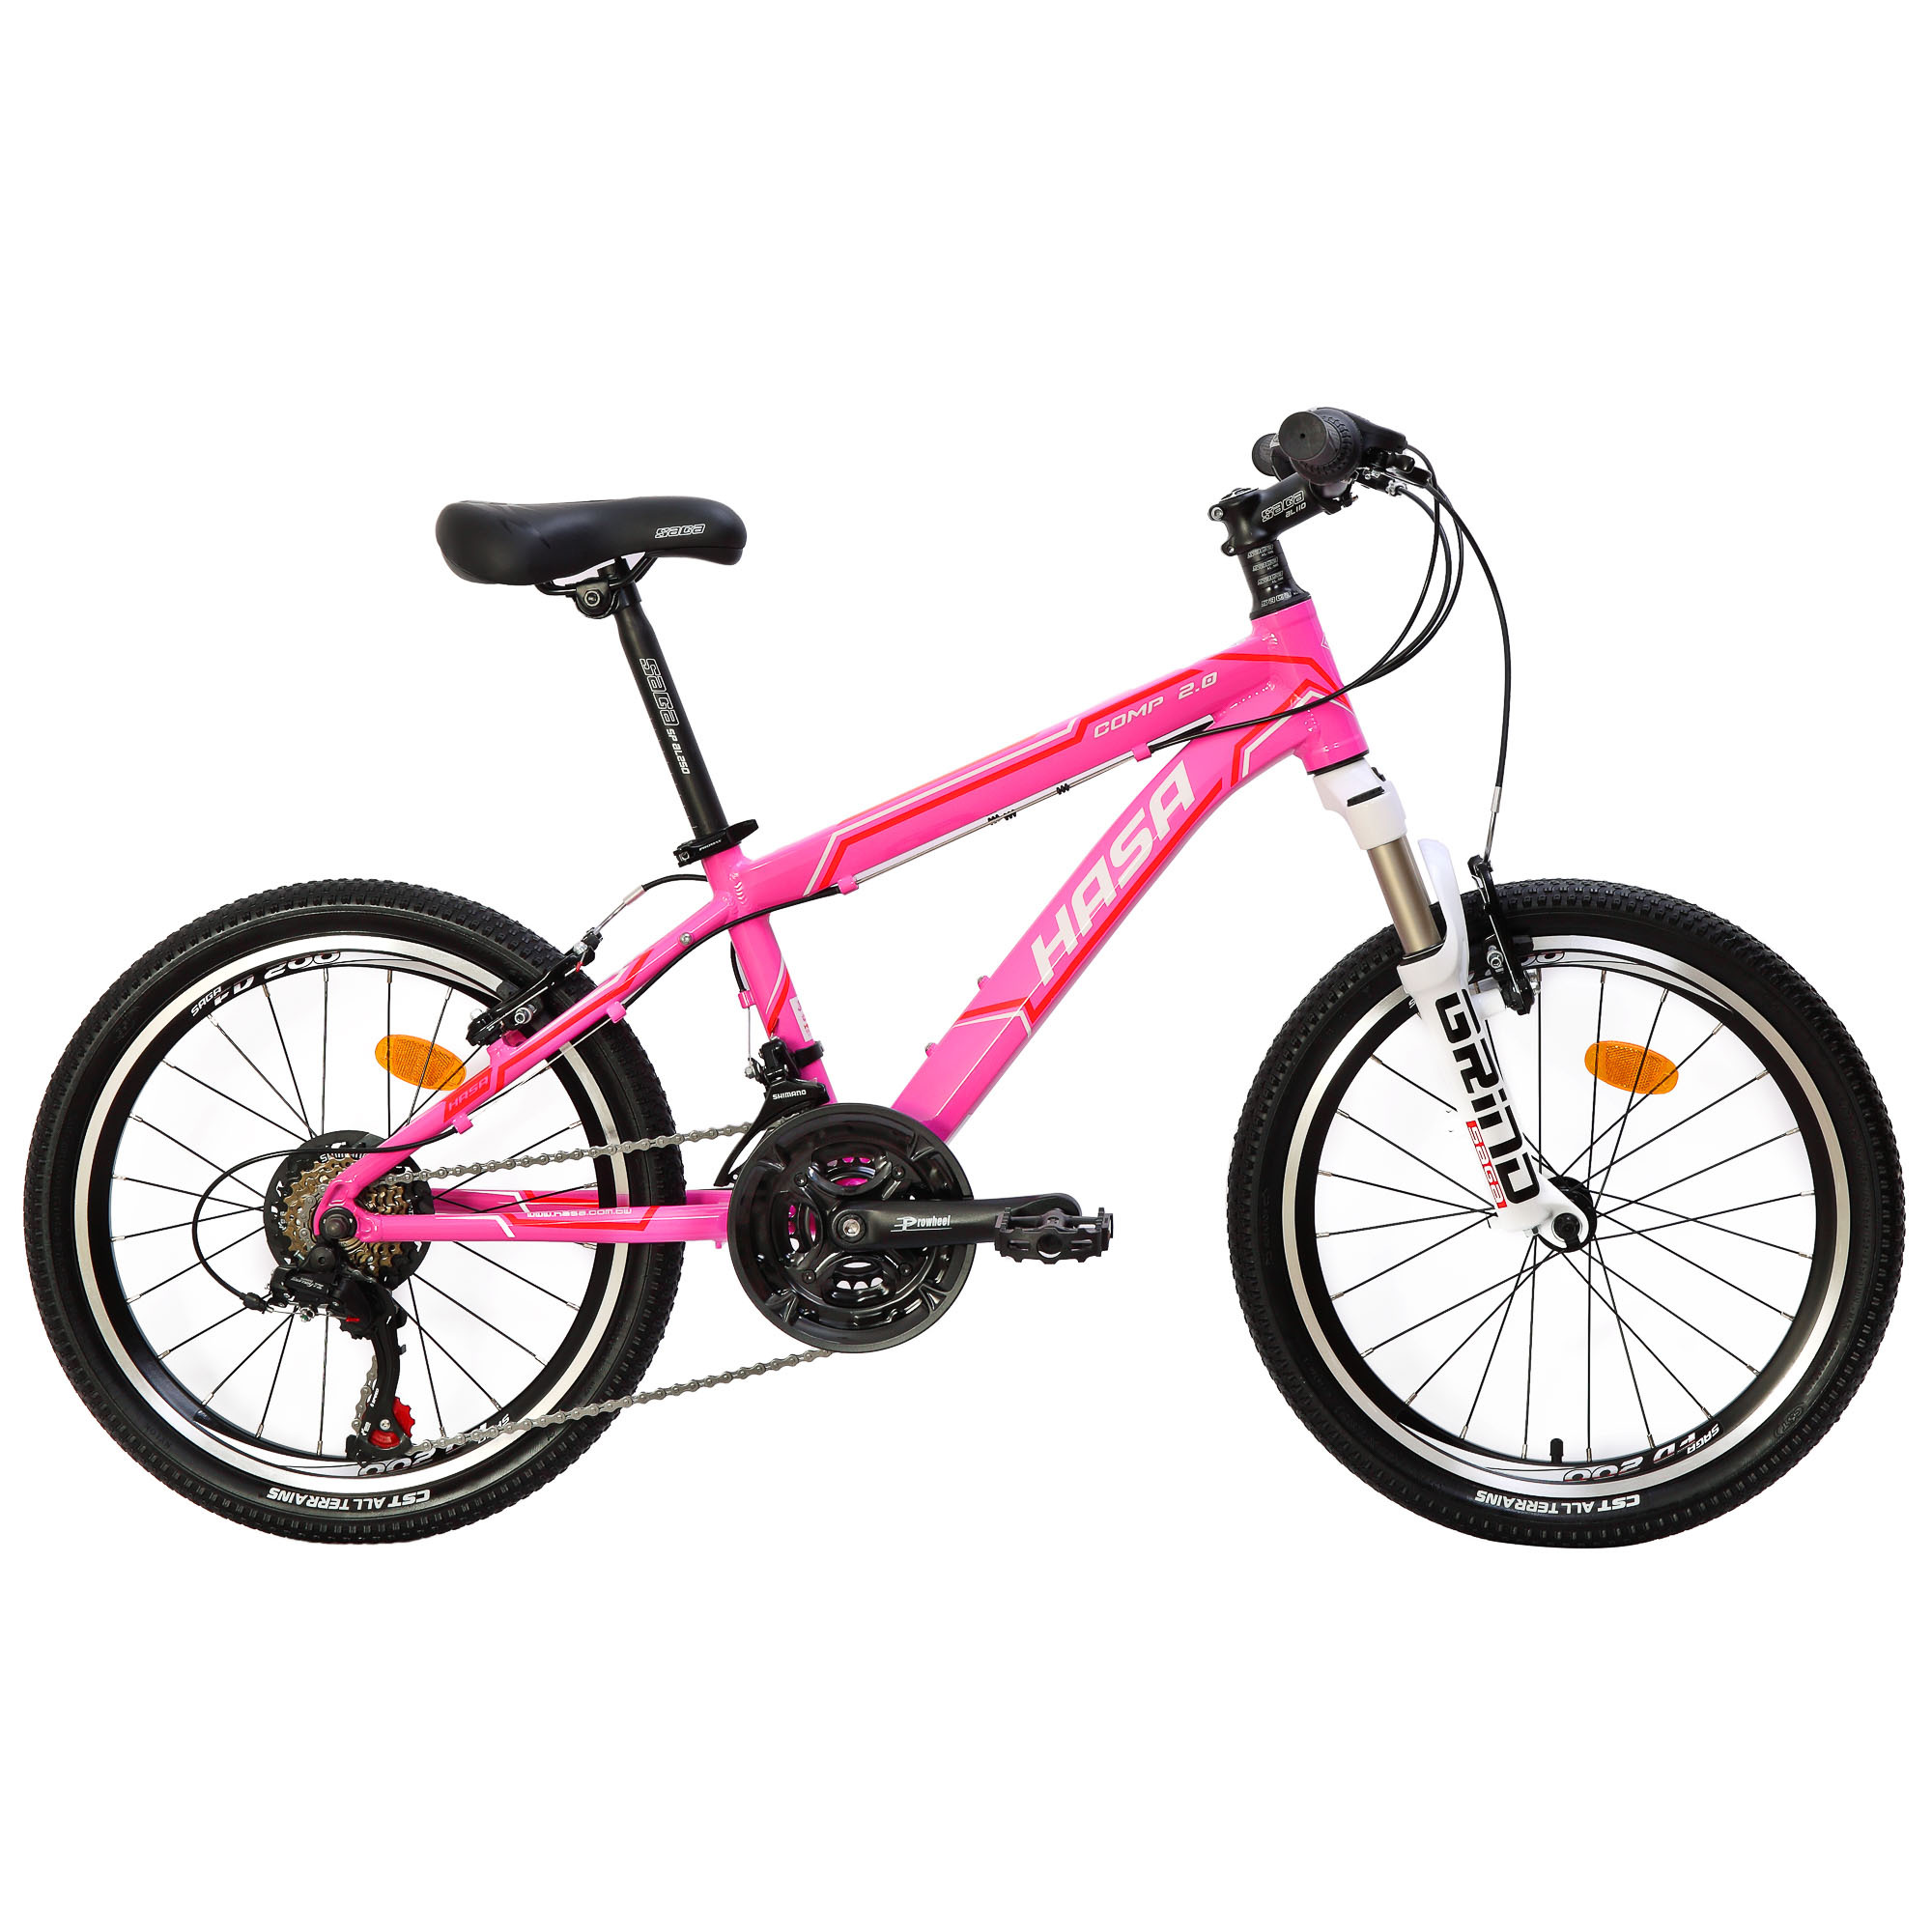 HASA  Kids Children Mountain Bike Bicycle MTB Pink with Detachable Training Wheels - 18 Speed 20" Wheels 12" Frame for 5-10 Years Old